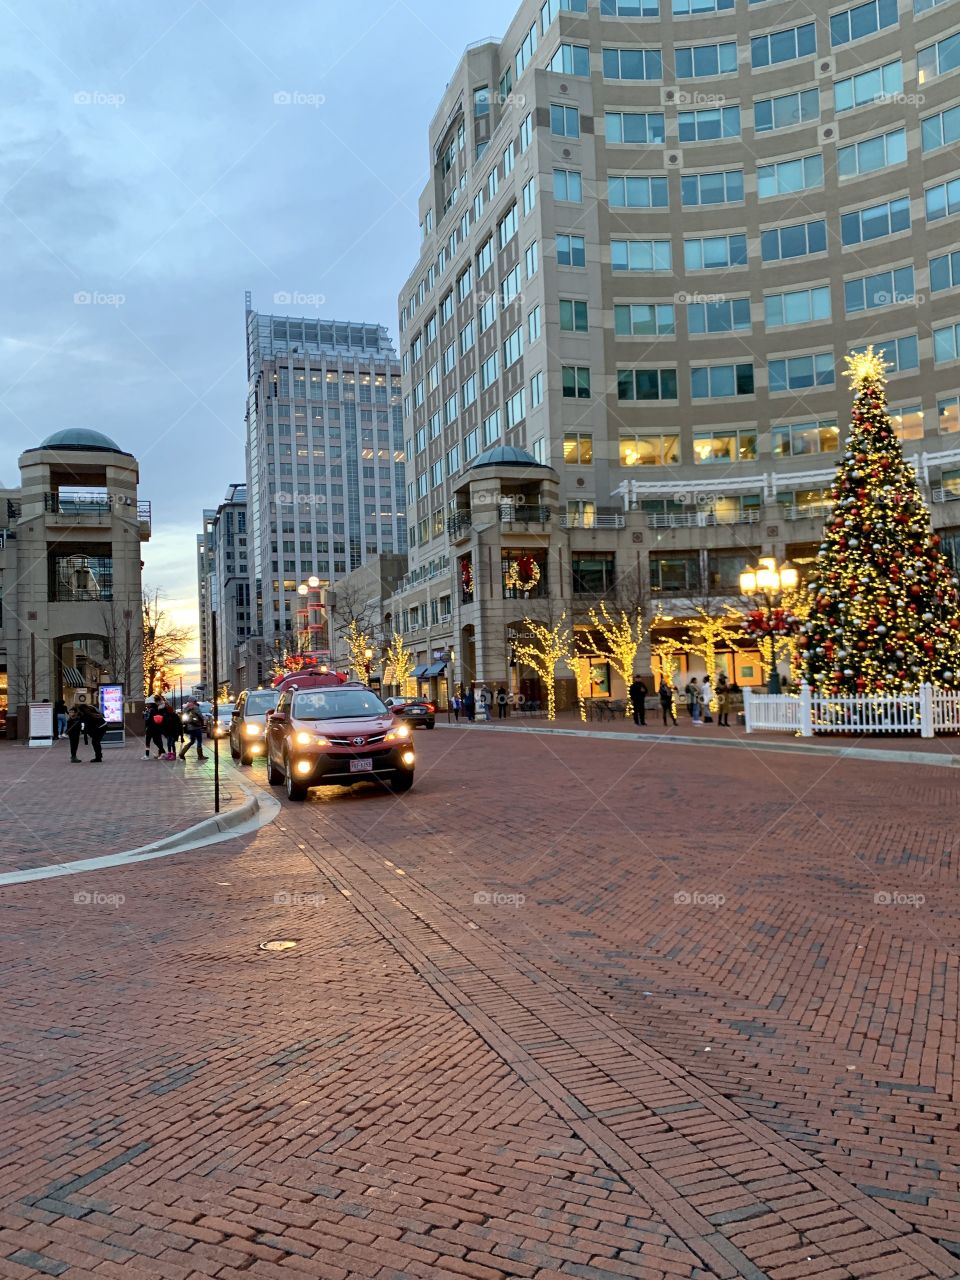 Reston Town Center at Christmas 